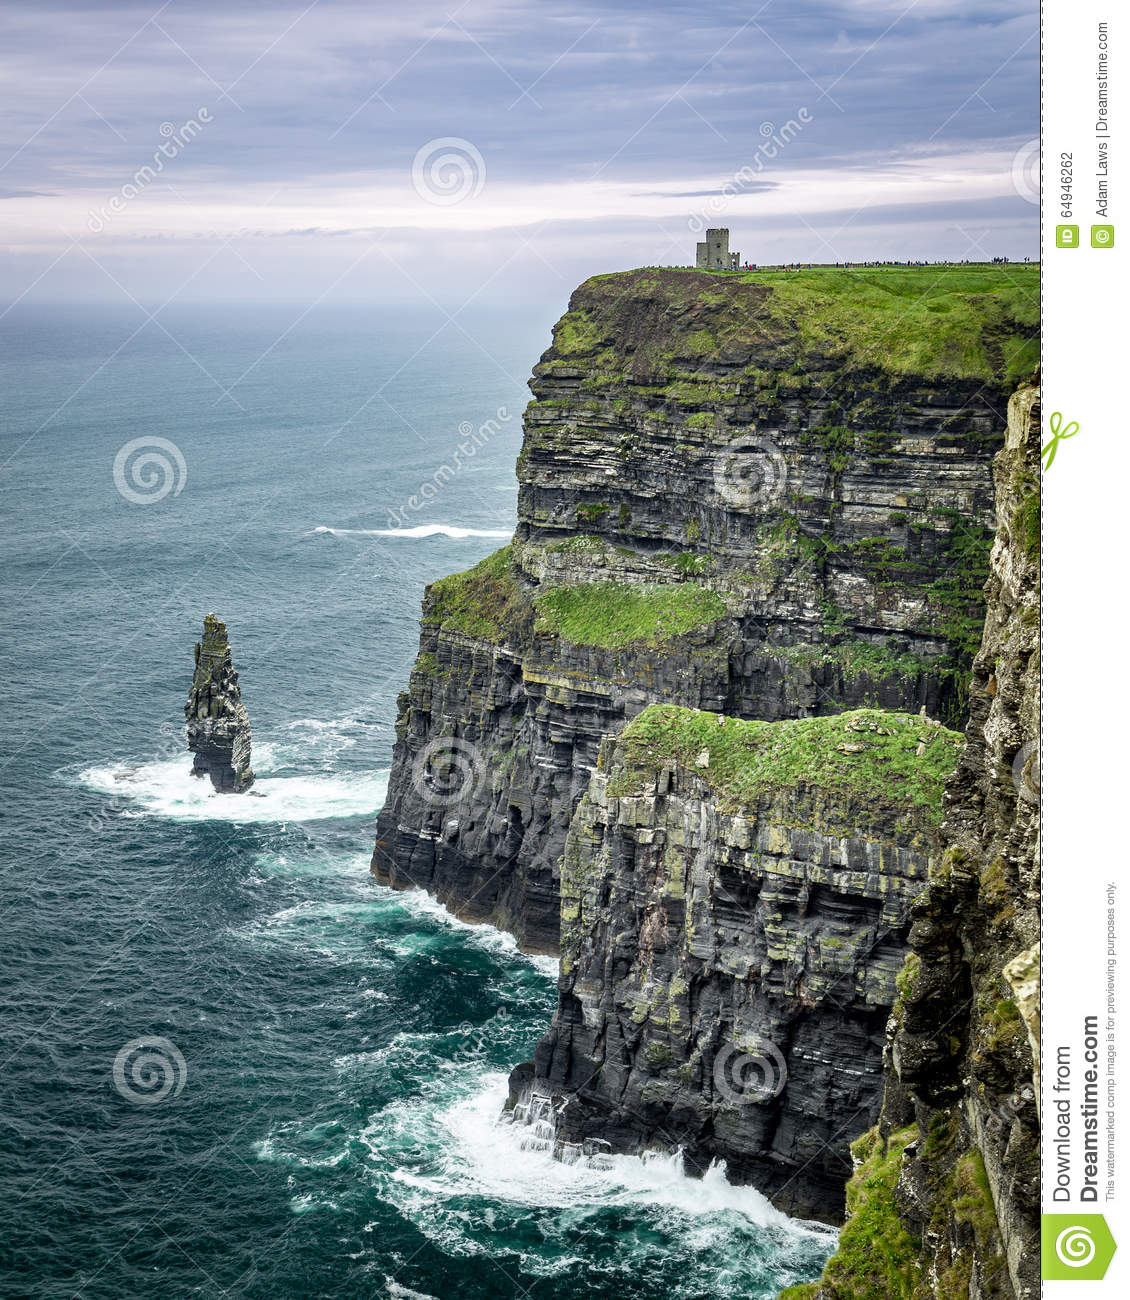 Cliffs Of Moher clipart #4, Download drawings